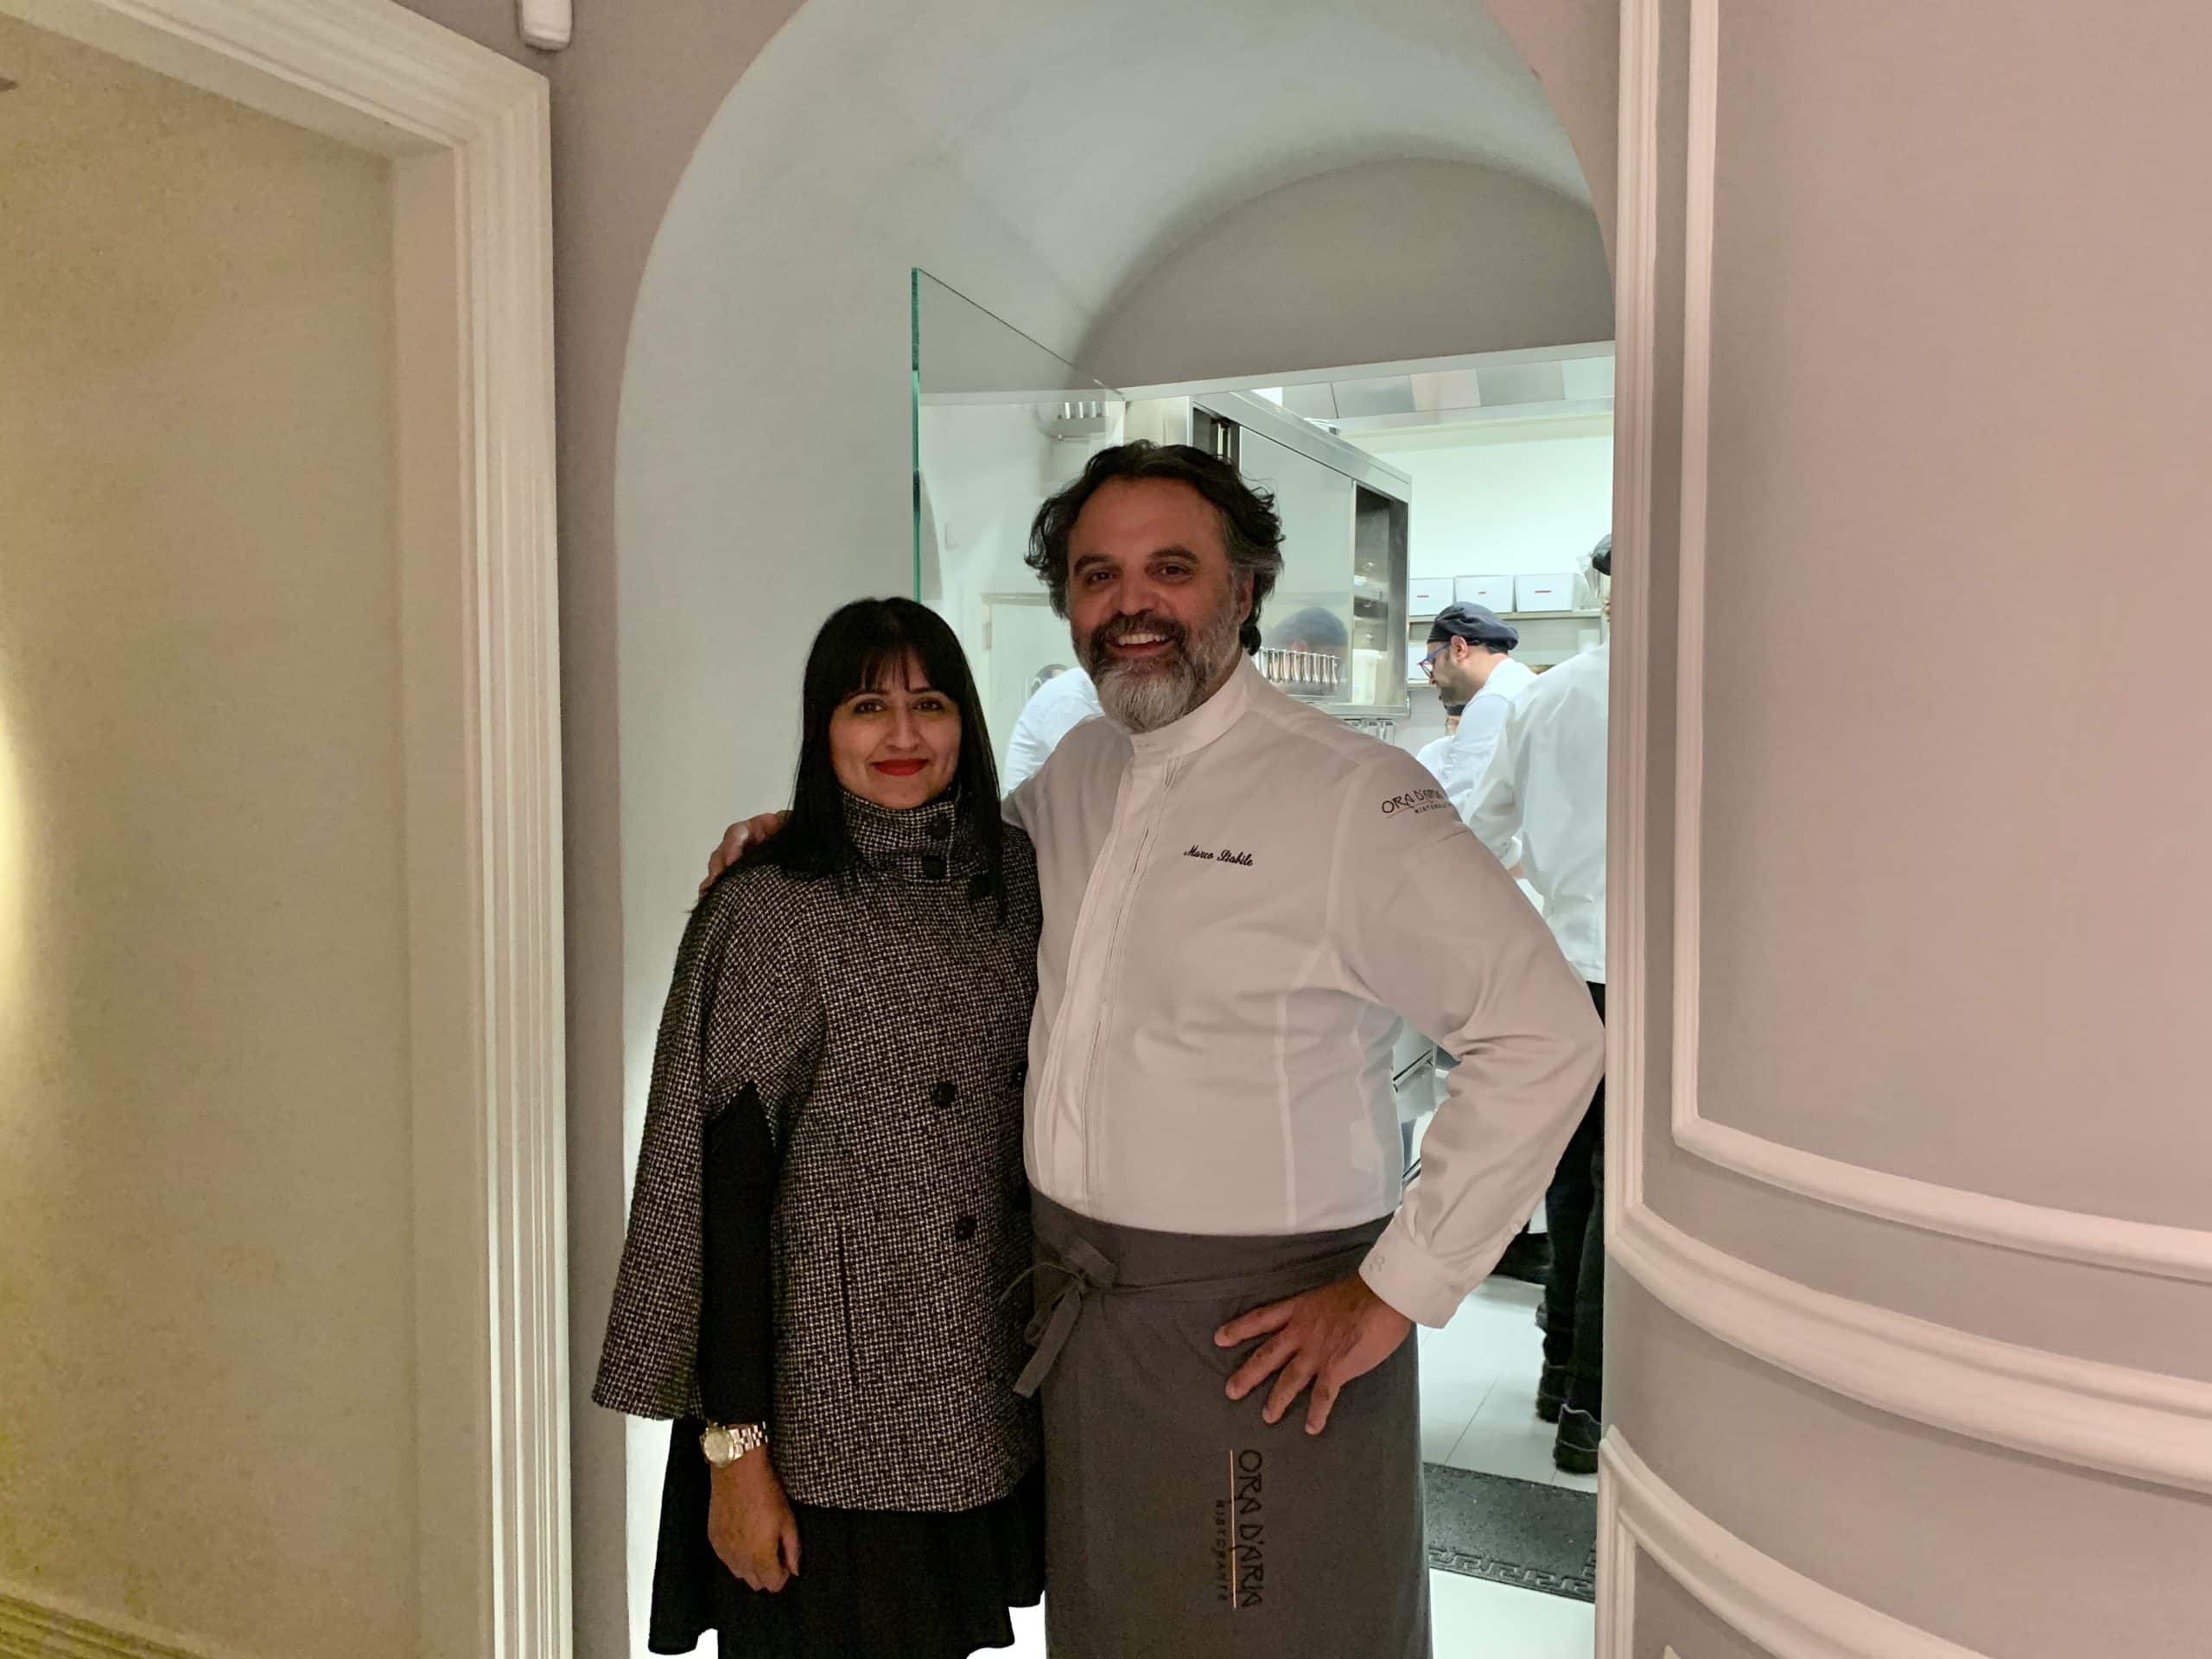 Head chef Marco Stabile and Bejal together with the kitchen in the background. 